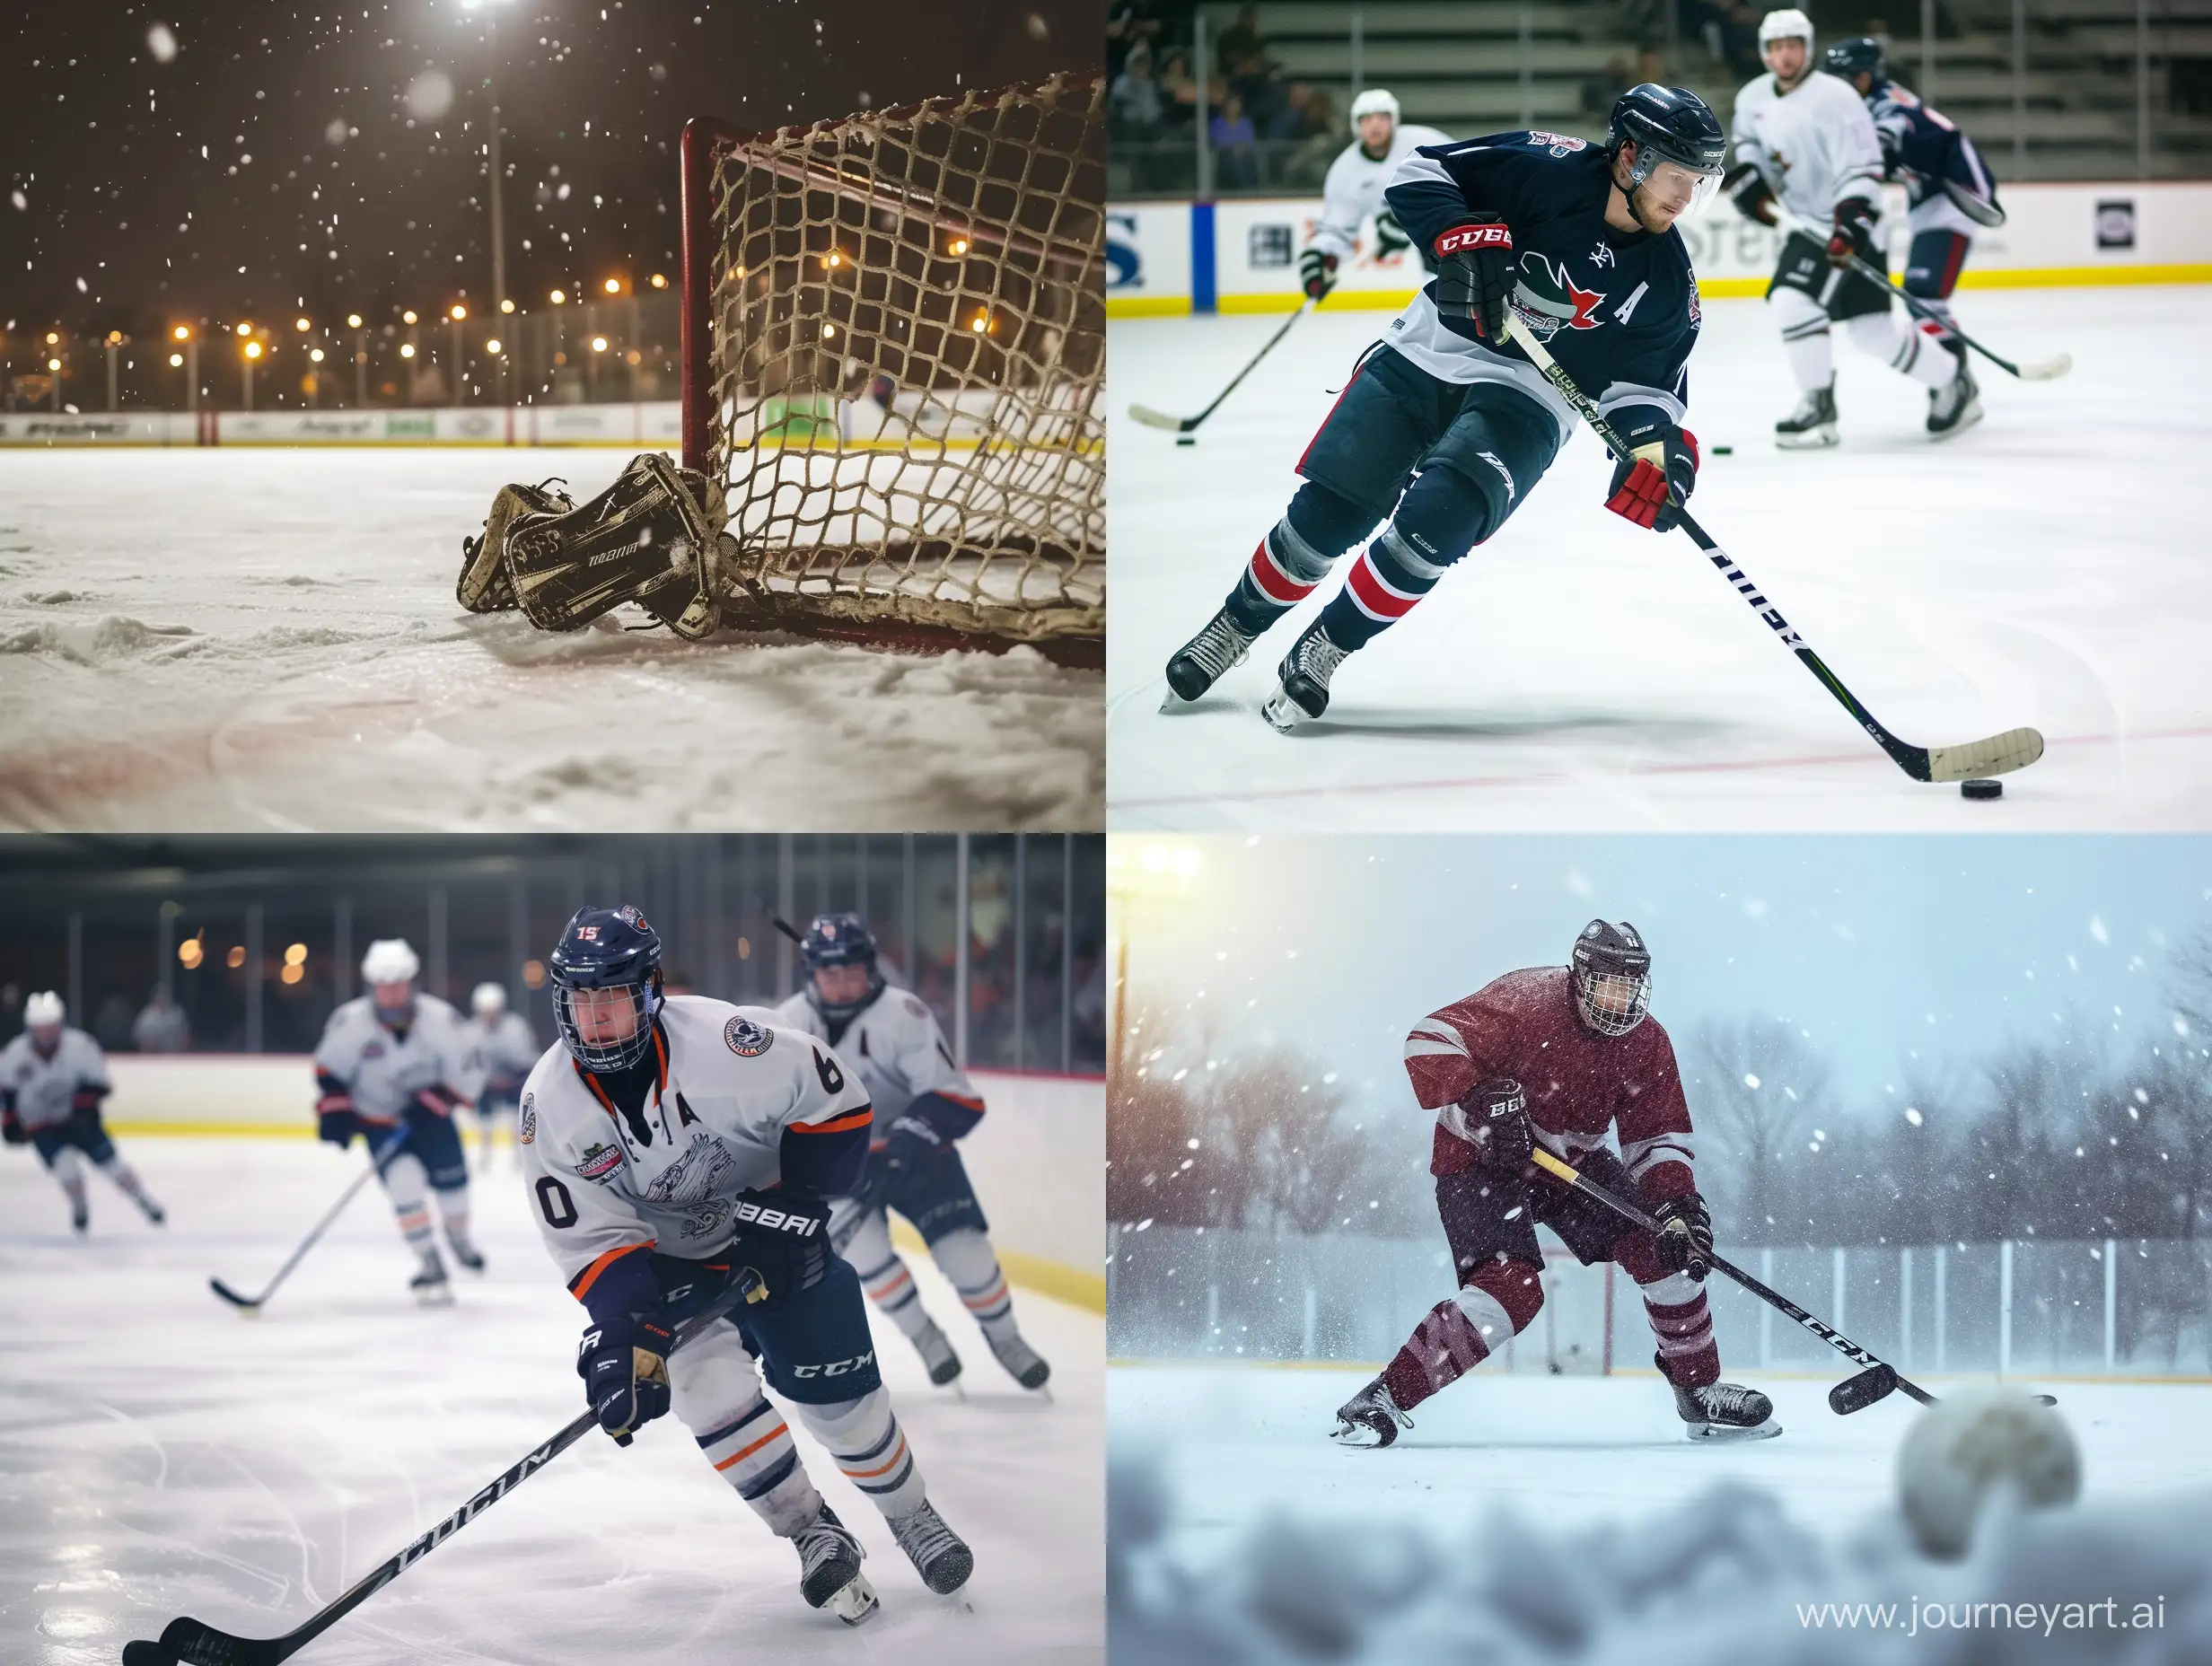 Dynamic-Hockey-Action-in-43-Aspect-Ratio-HighEnergy-Sports-Photography